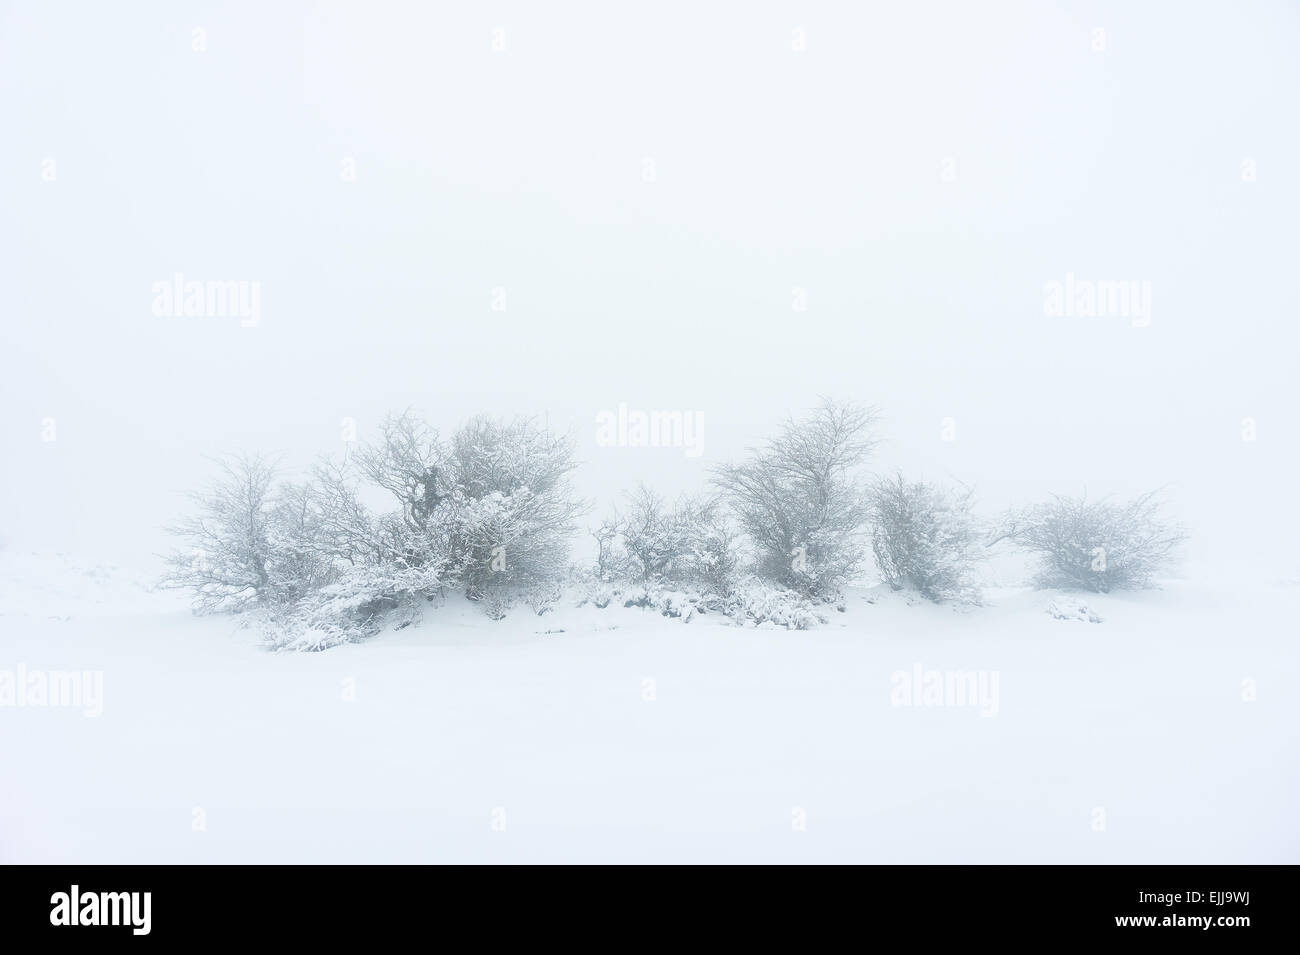 high key winter landscape with trees Stock Photo